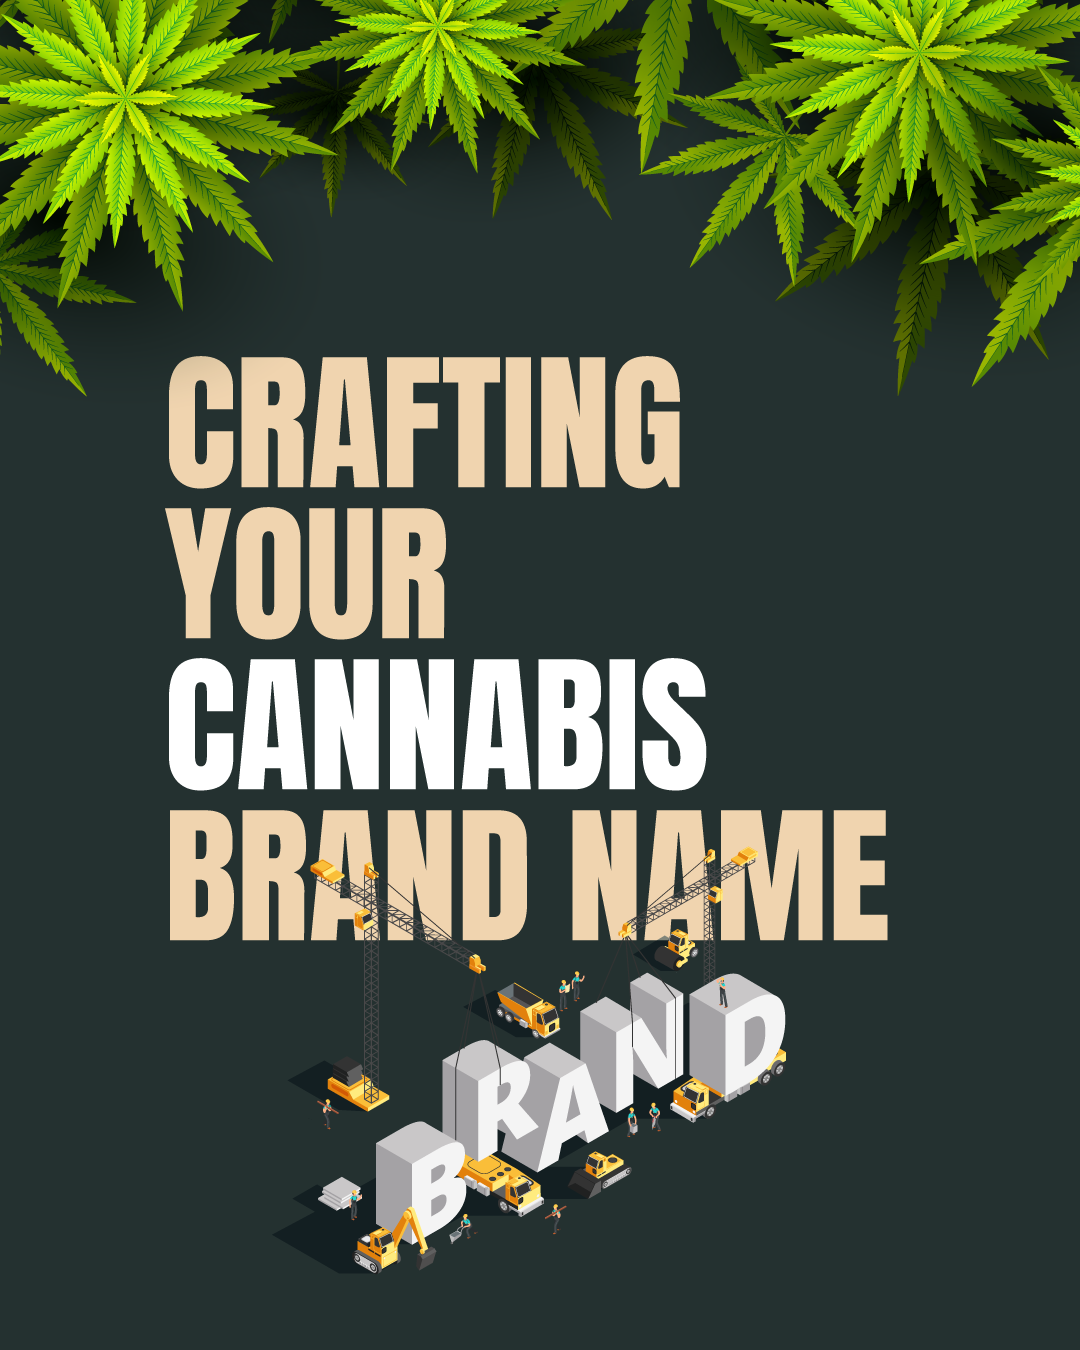 Crafting Your Cannabis Brand Name: 8 Expert Tips from a Branding Pro